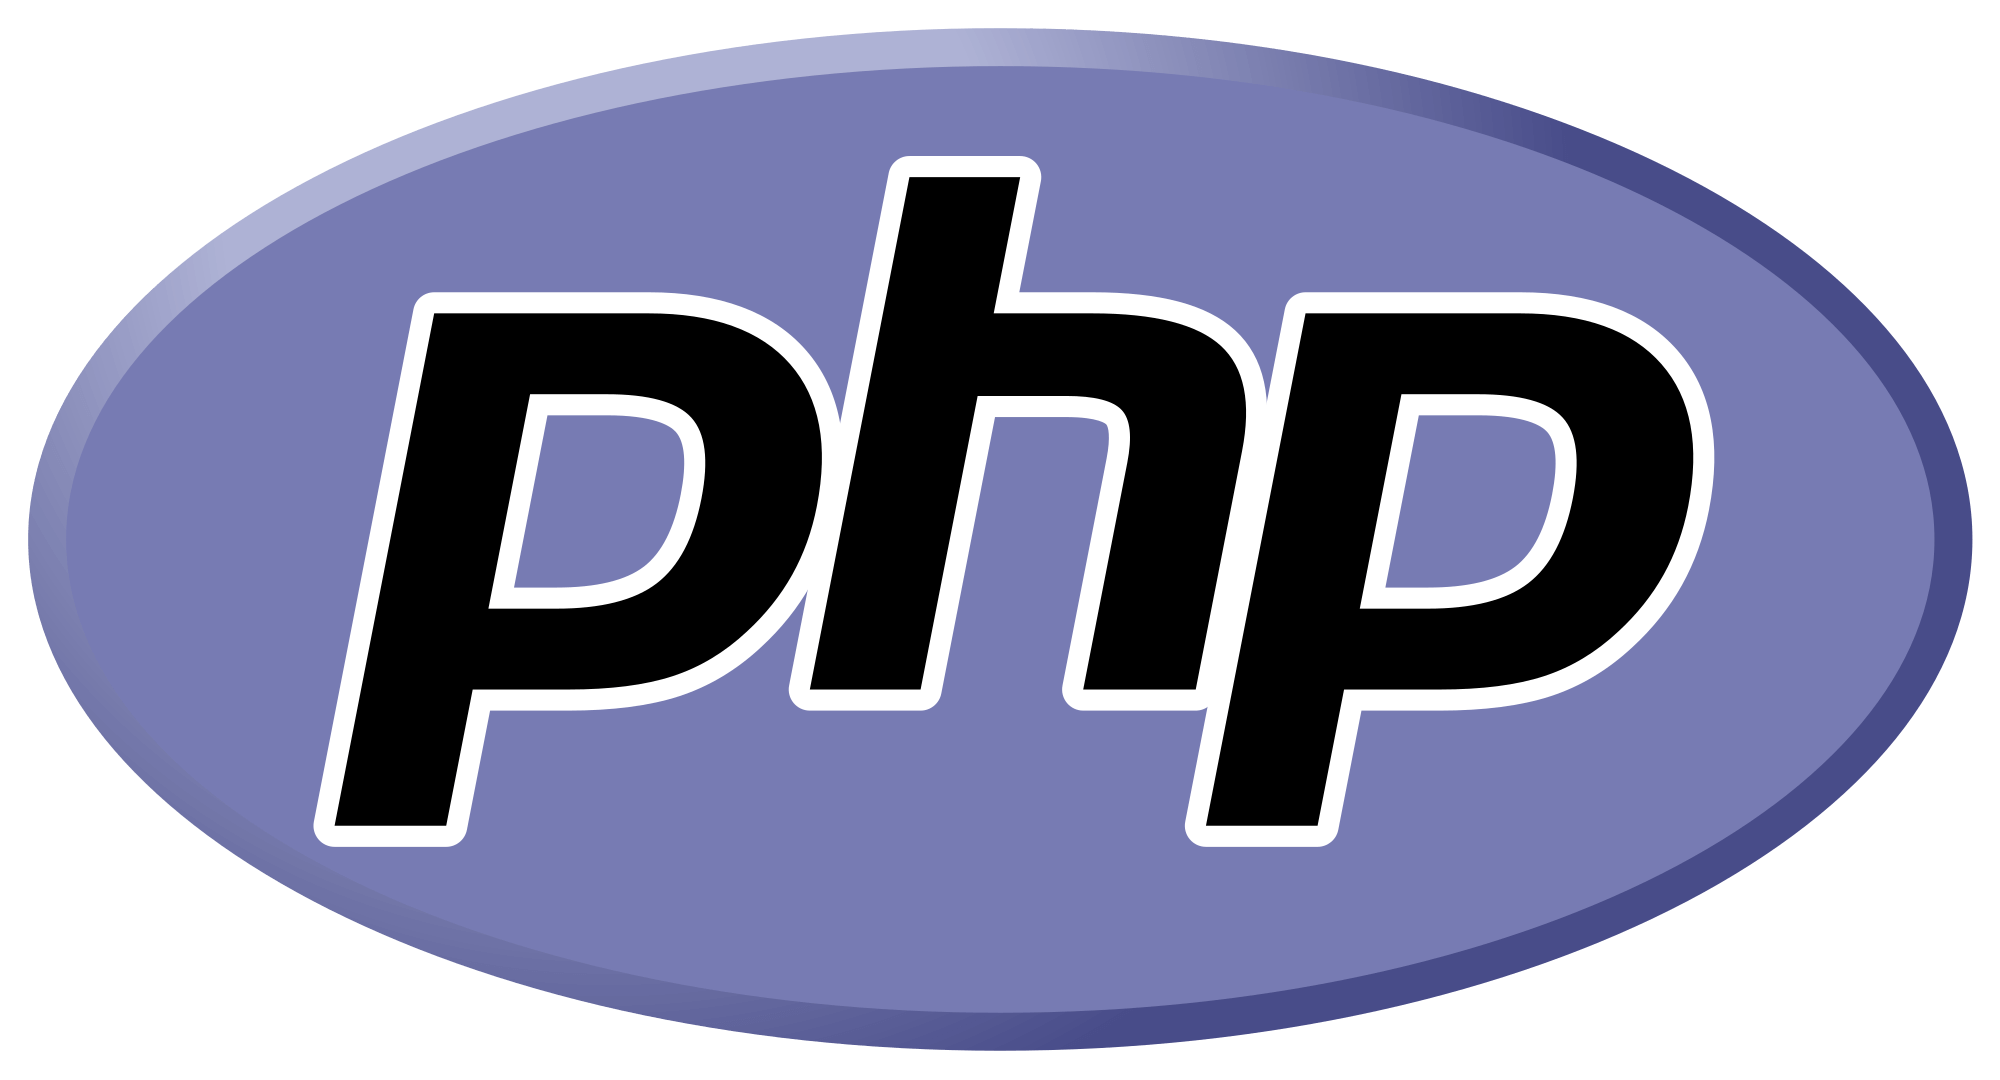 Webmingo | Openings for Php Internship